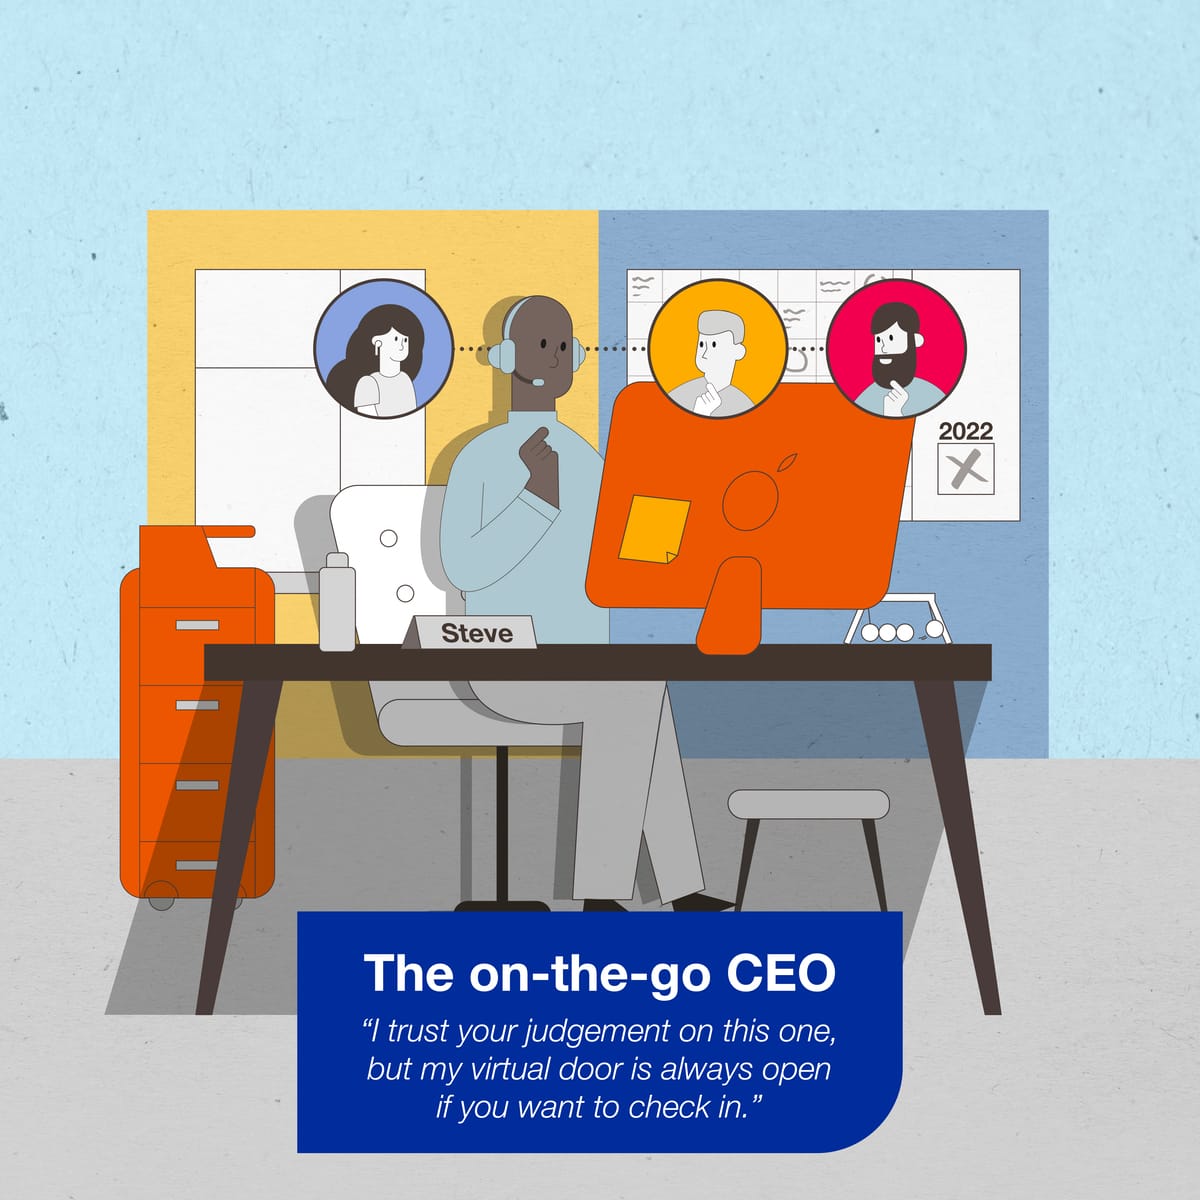 Illustration of an on-the-go CEO video conferencing with three executives from a remote office environment